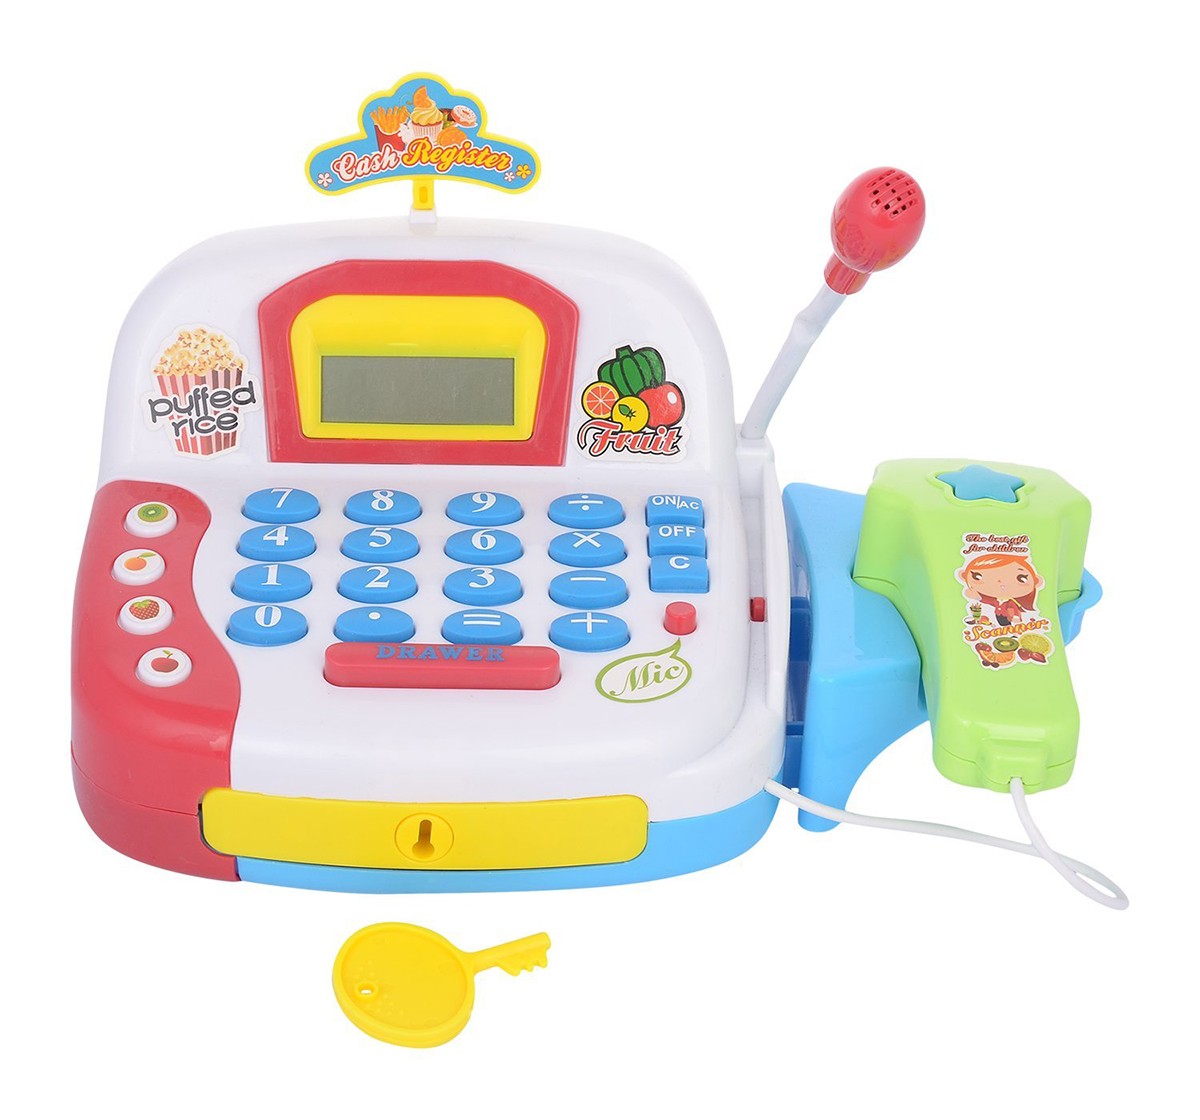 Comdaq Music And Lights Cash Register Roleplay Set for age 3Y+ (White)